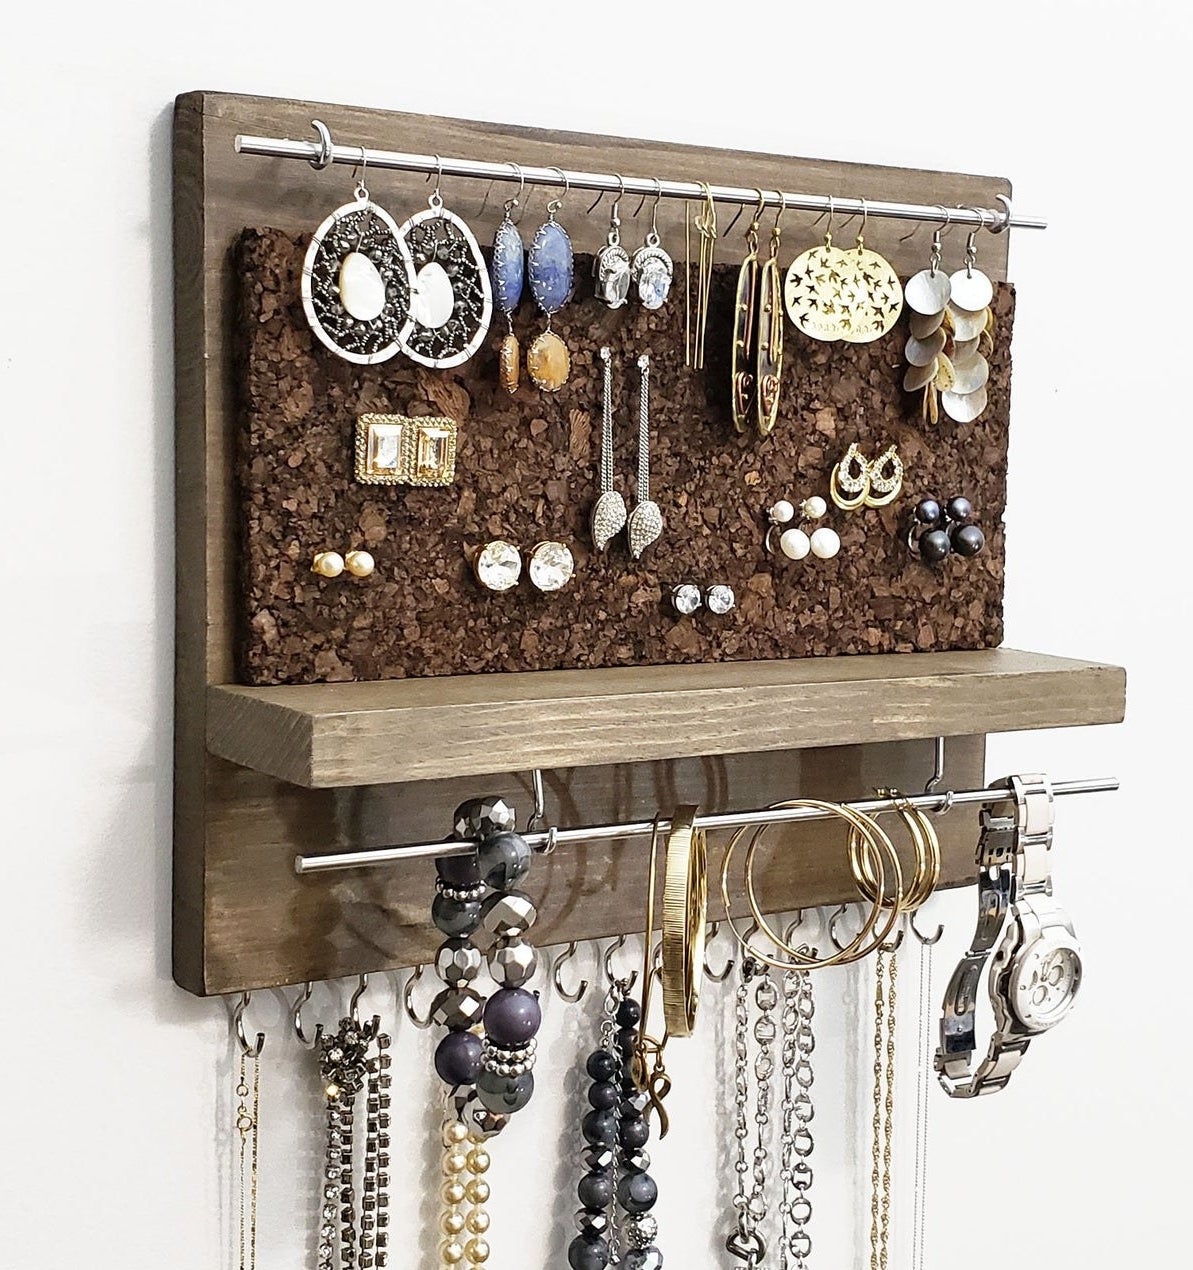 photo of the jewelry organizer styled with necklaces and bracelets and earrings